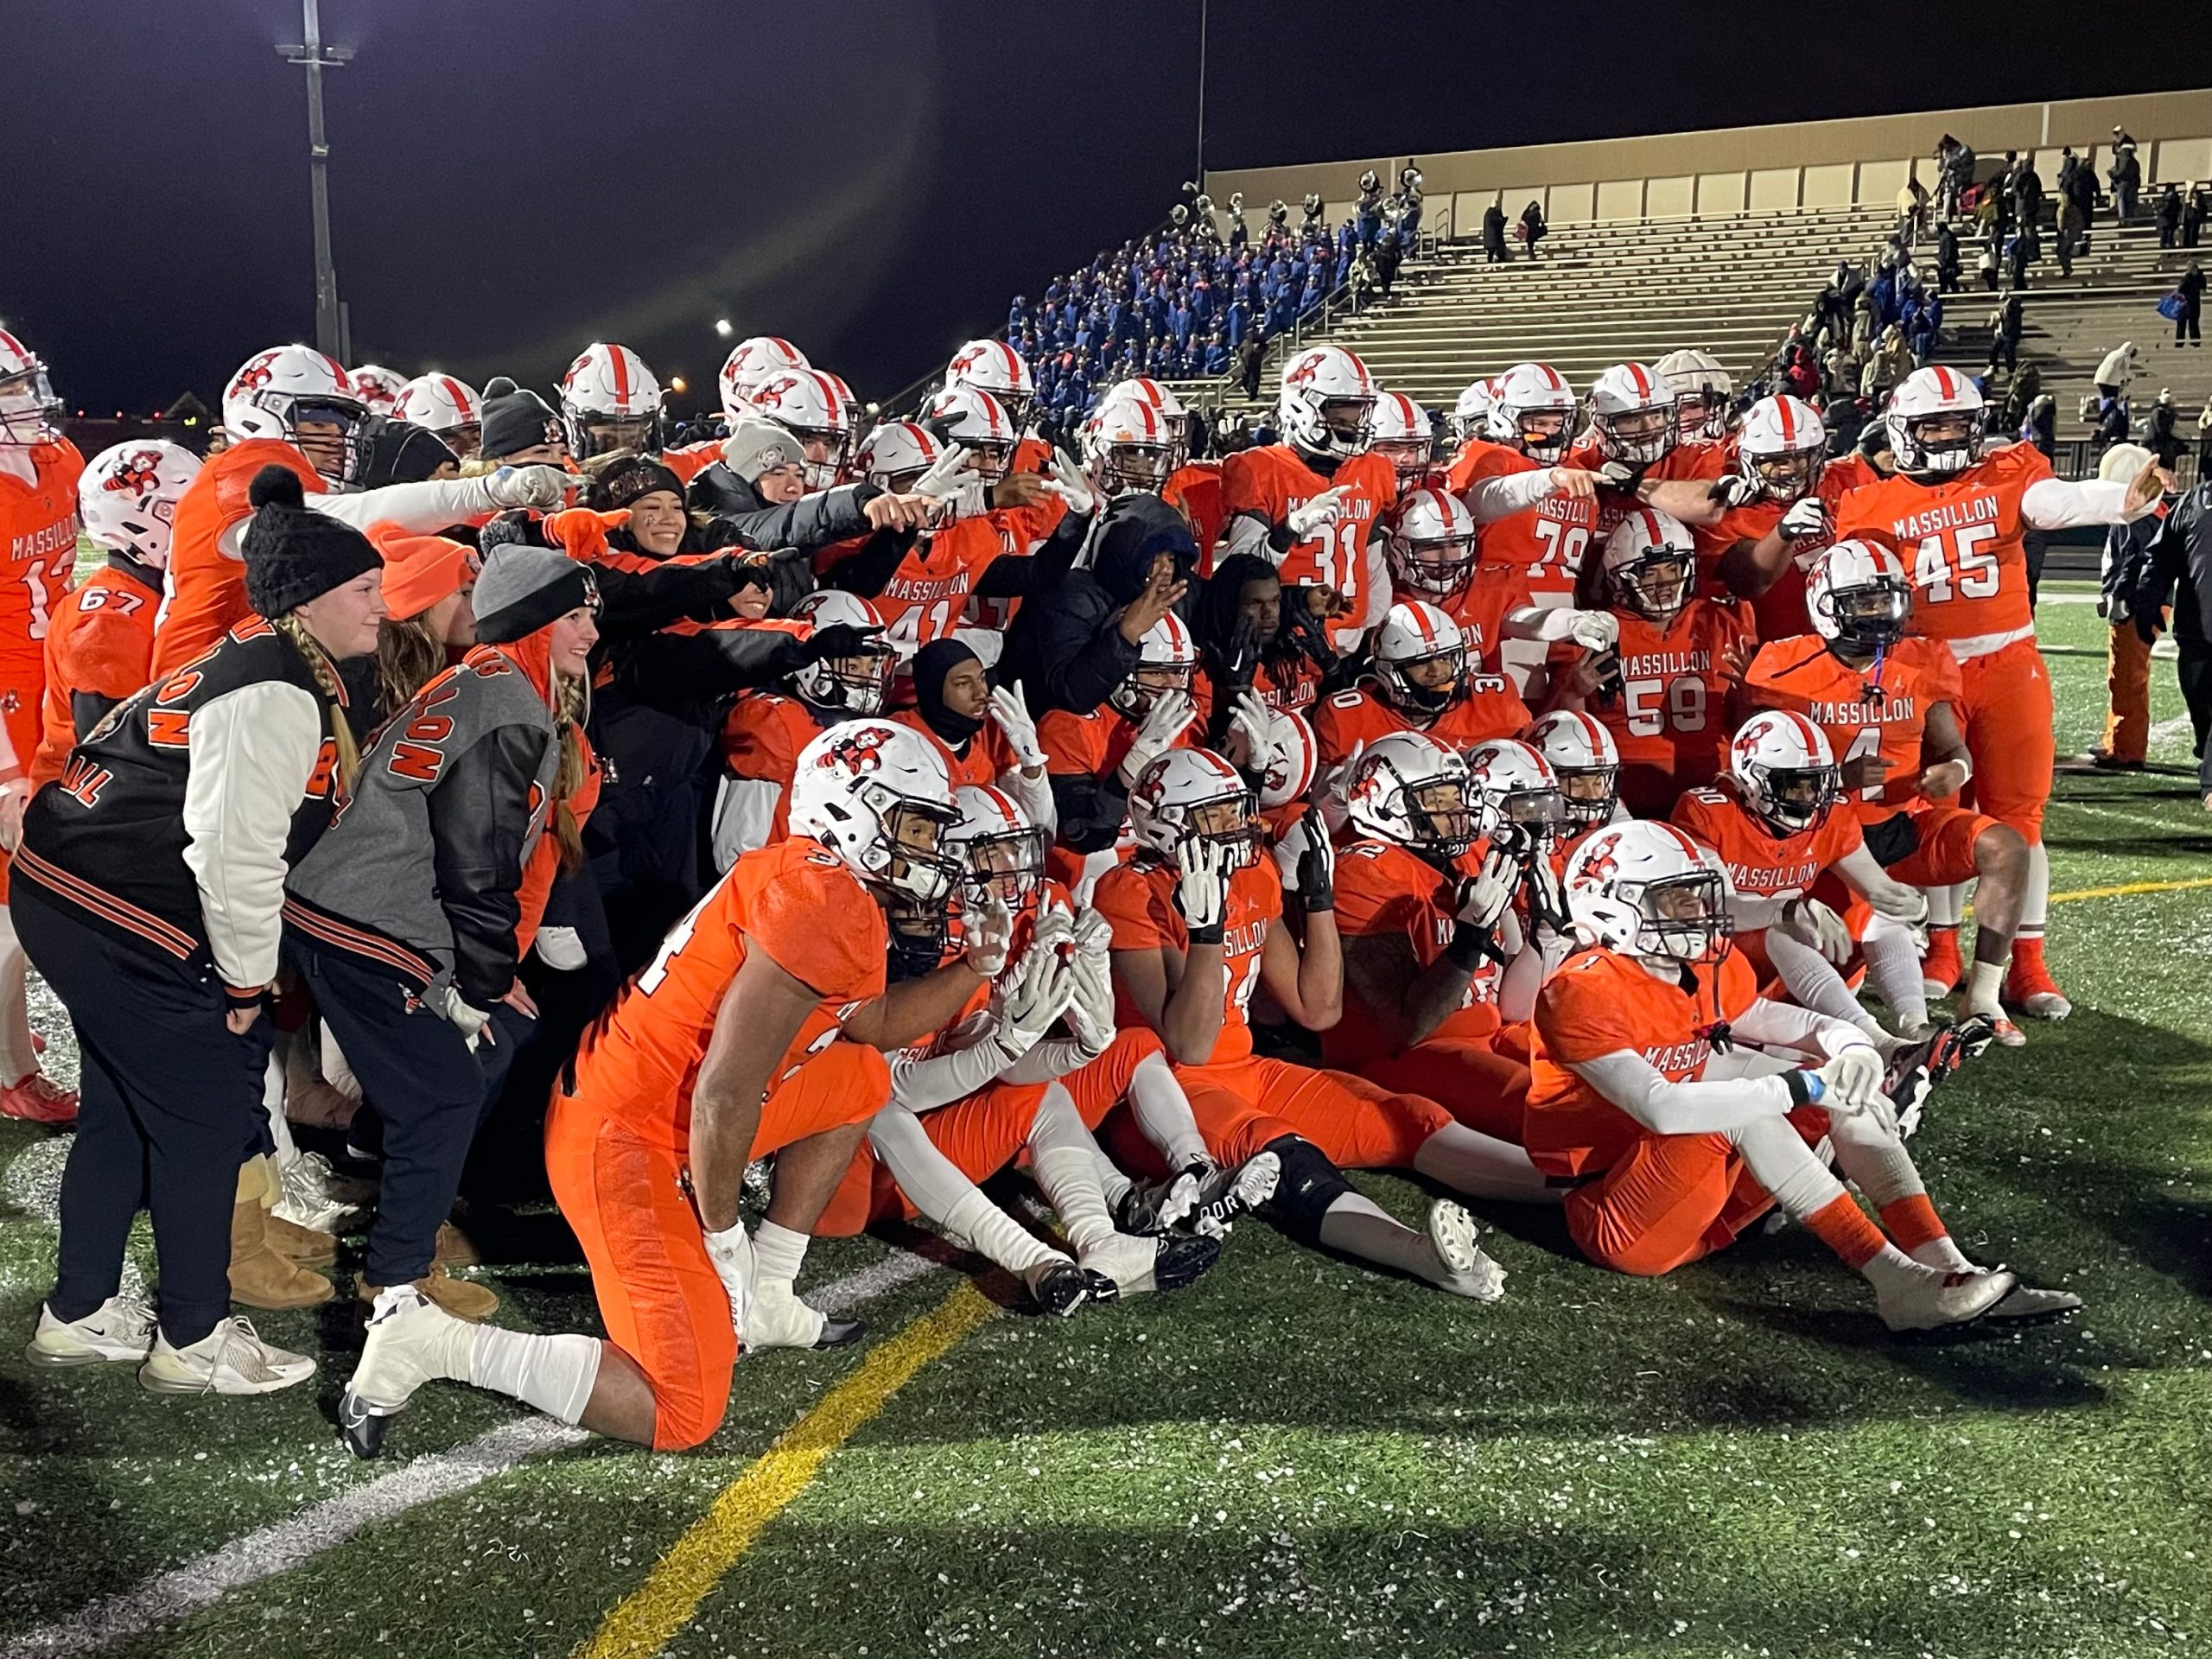 The Massillon Tigers celebrate their Division II, Region 7 final win over Lake, 24-6, at Byers Field in Parma (Photo credit: Mitch Spinell).